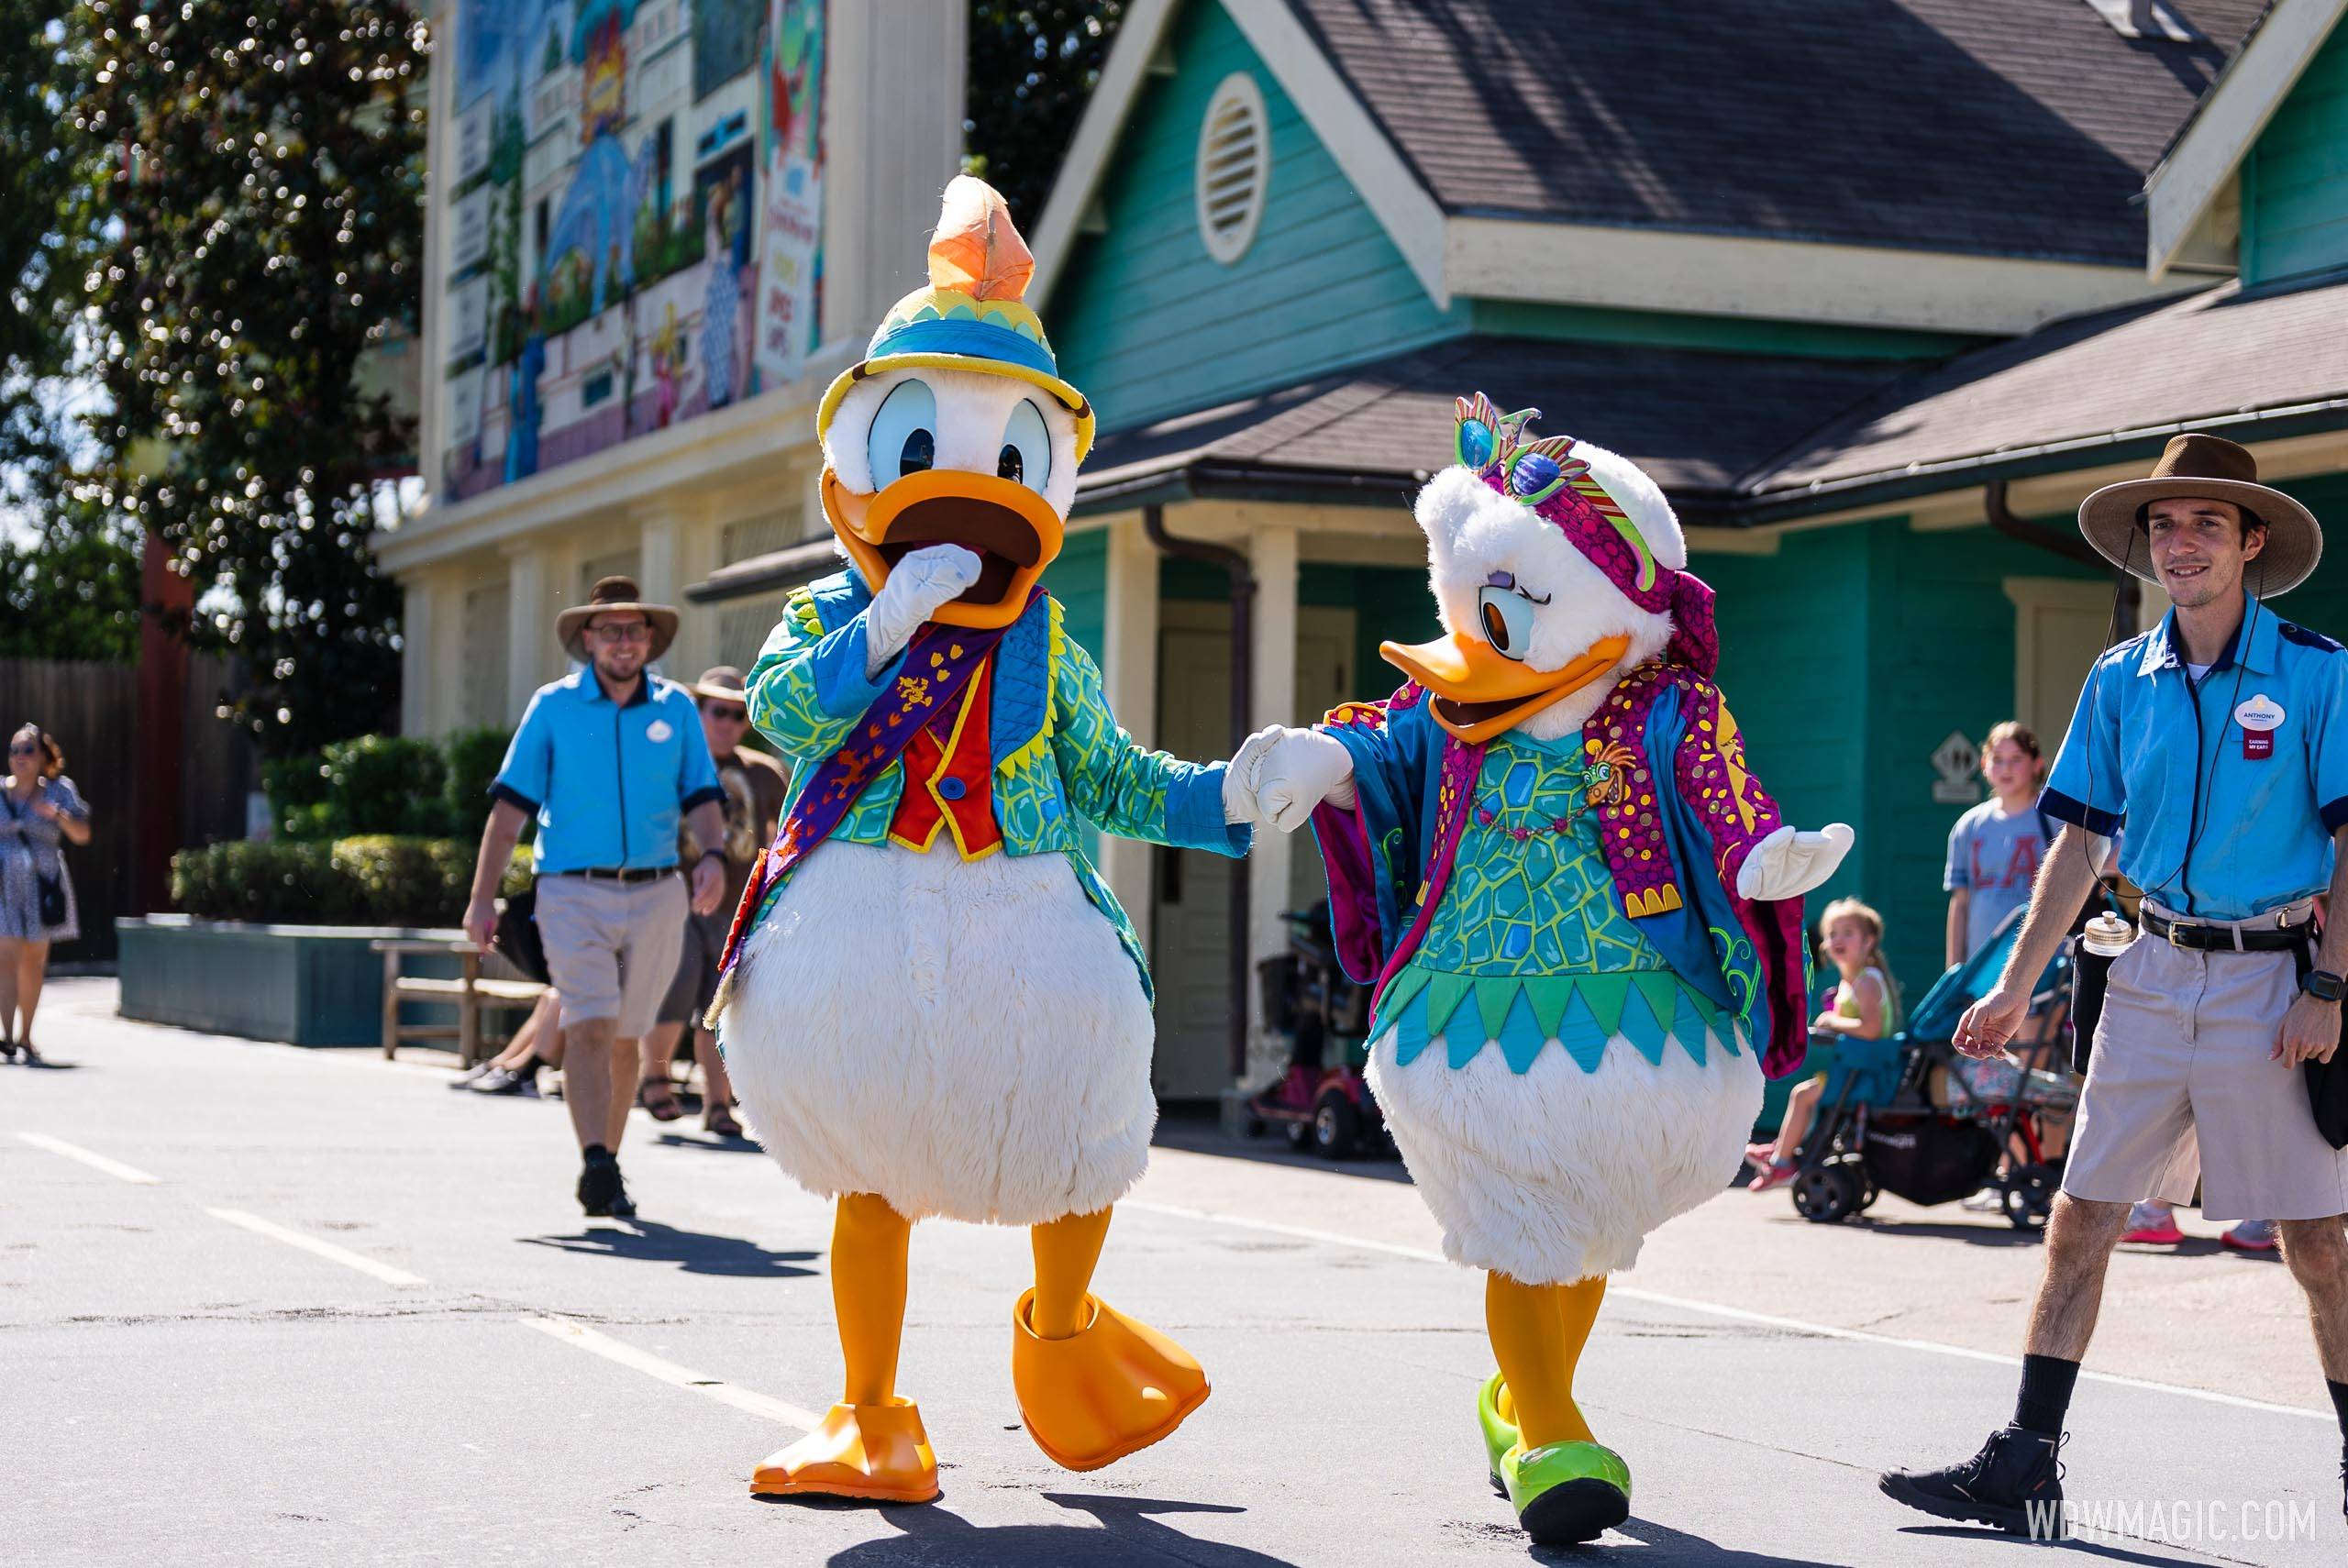 Donald Duck, Daisy Duck, and Chip 'n' Dale back on land with a return to Donald's Dino-Bash meet and greets at Disney's Animal Kingdom